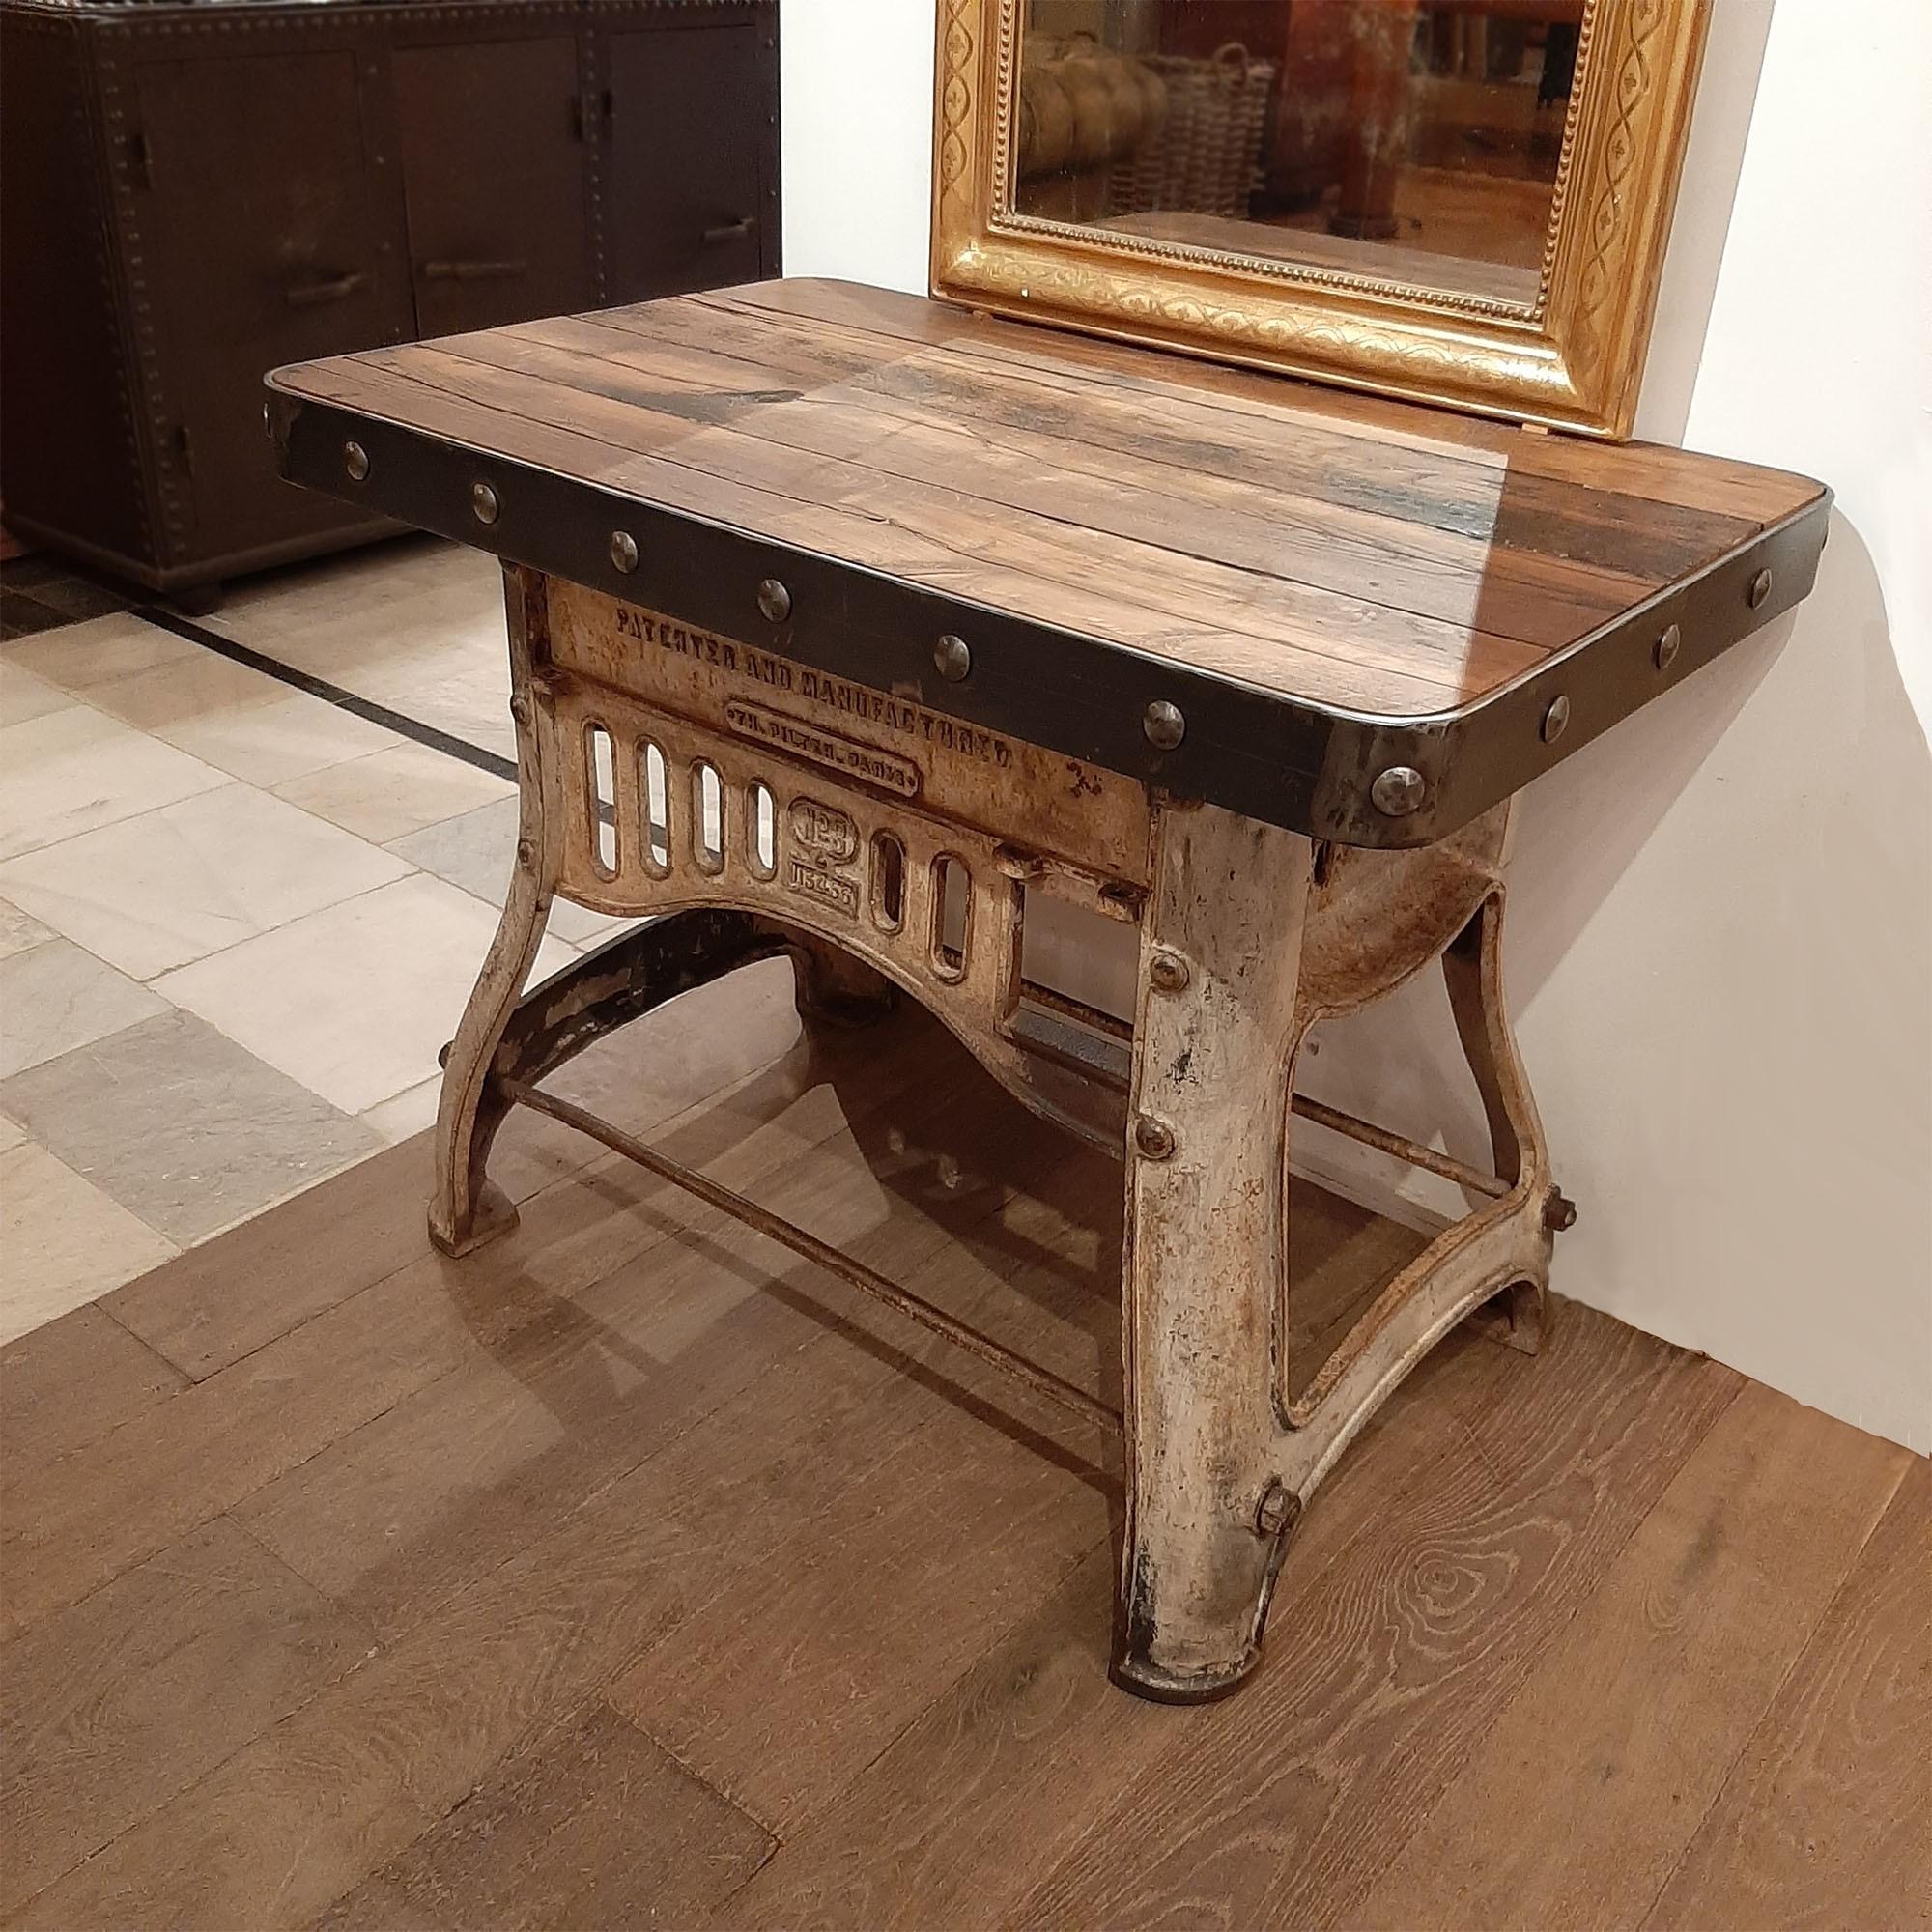 A robust industrial workbench to be used as sidetable or sideboard. This beautiful piece is newly made out of very old industrial materials; an old cast-iron base and a top made of antique oak wagon parts, finished with a sturdy steel